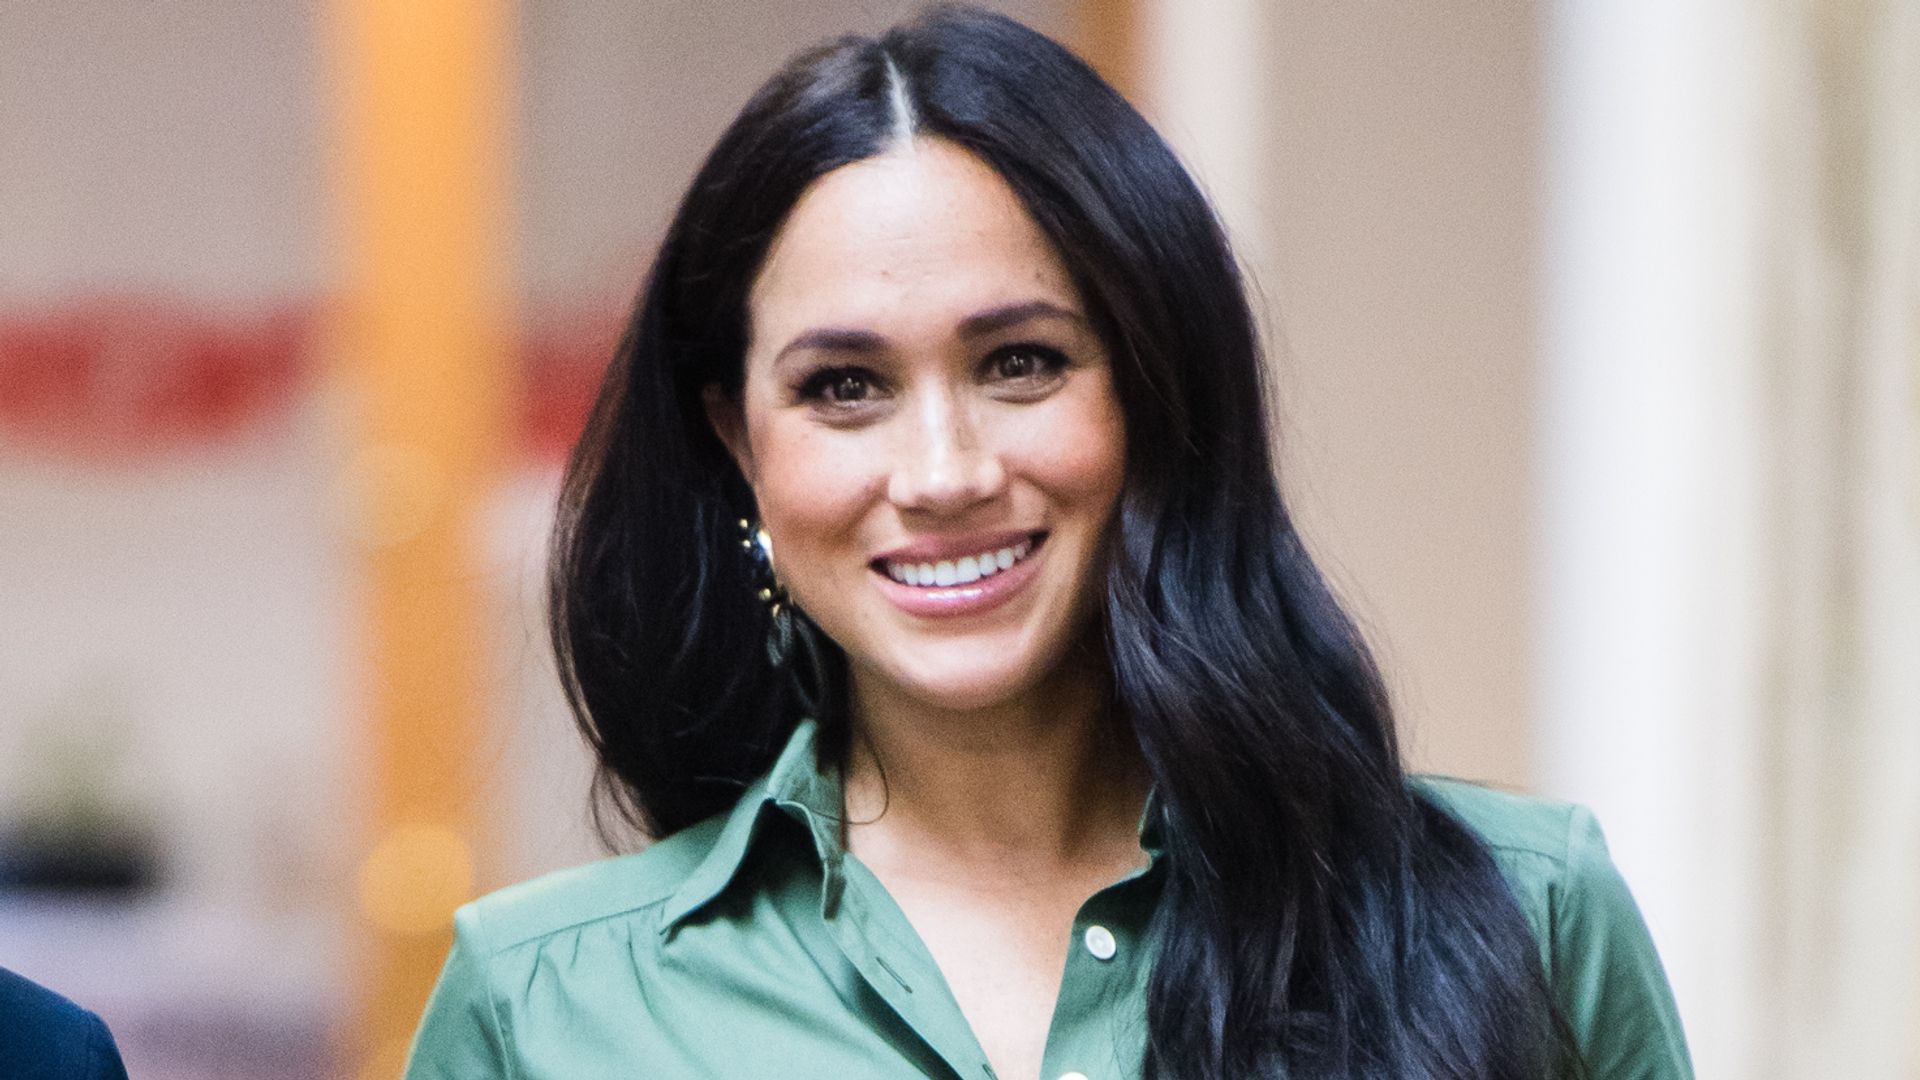 Meghan Markle welcomes spring in floral shirt dress: Here's 5 you can shop now